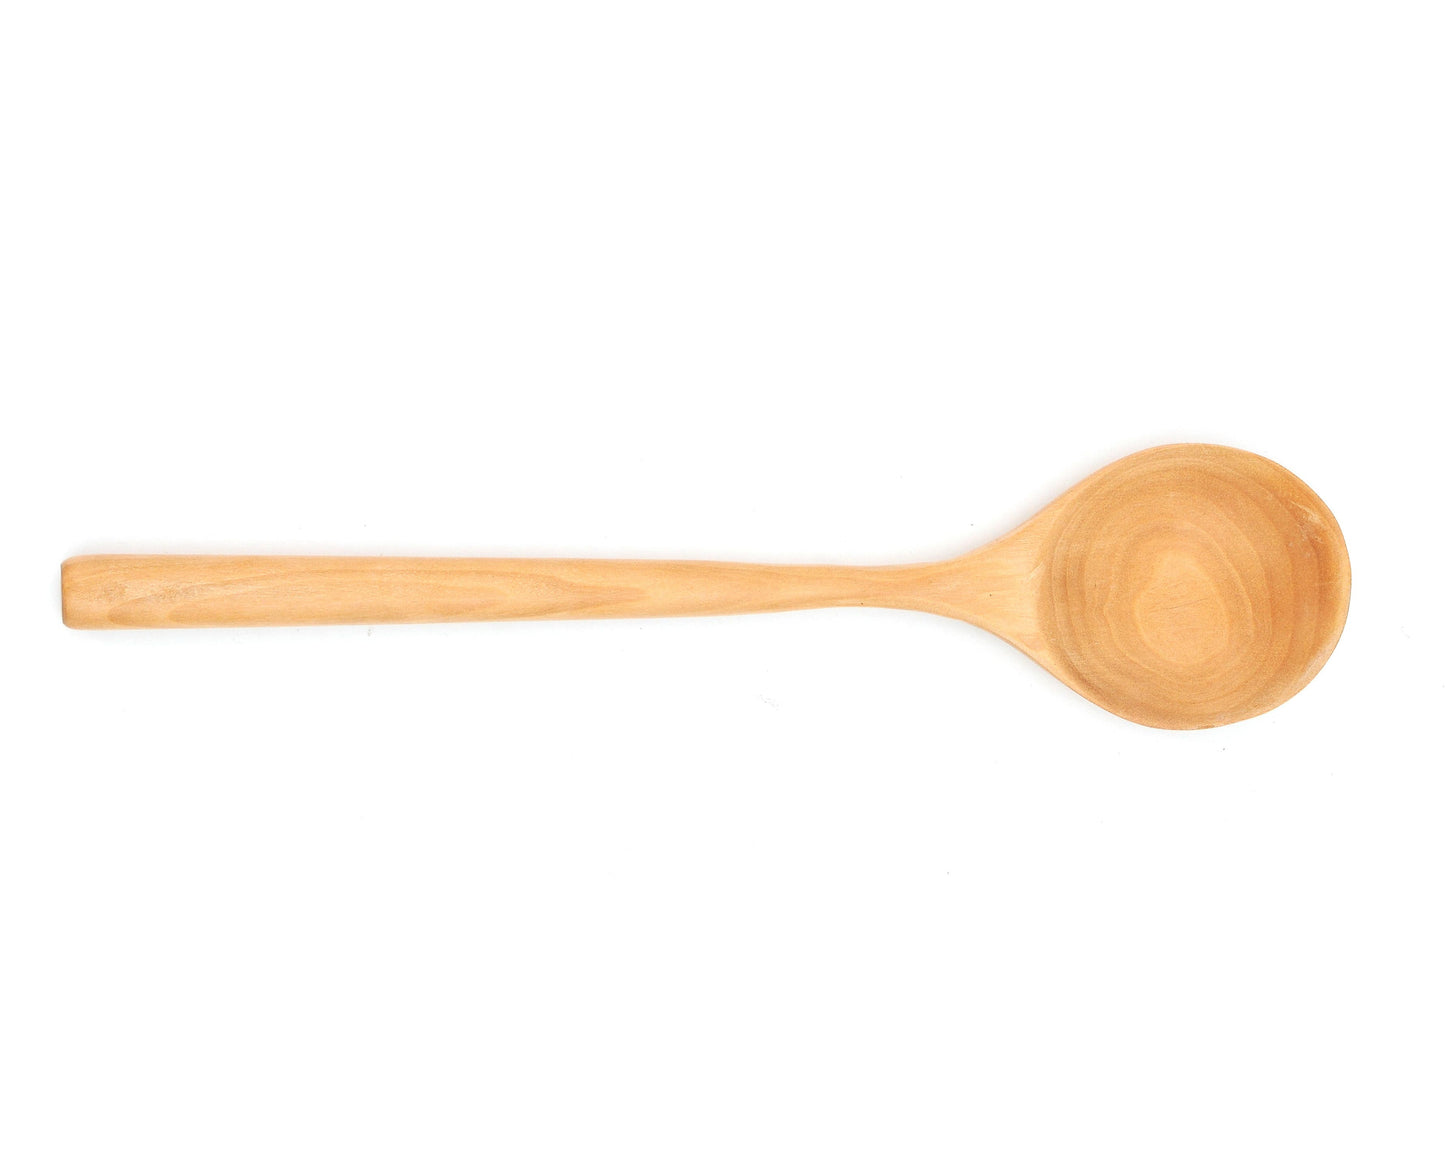 The Handcrafted Coconut Wood Cooking Spoon - The Beauty Of The Natural Wood